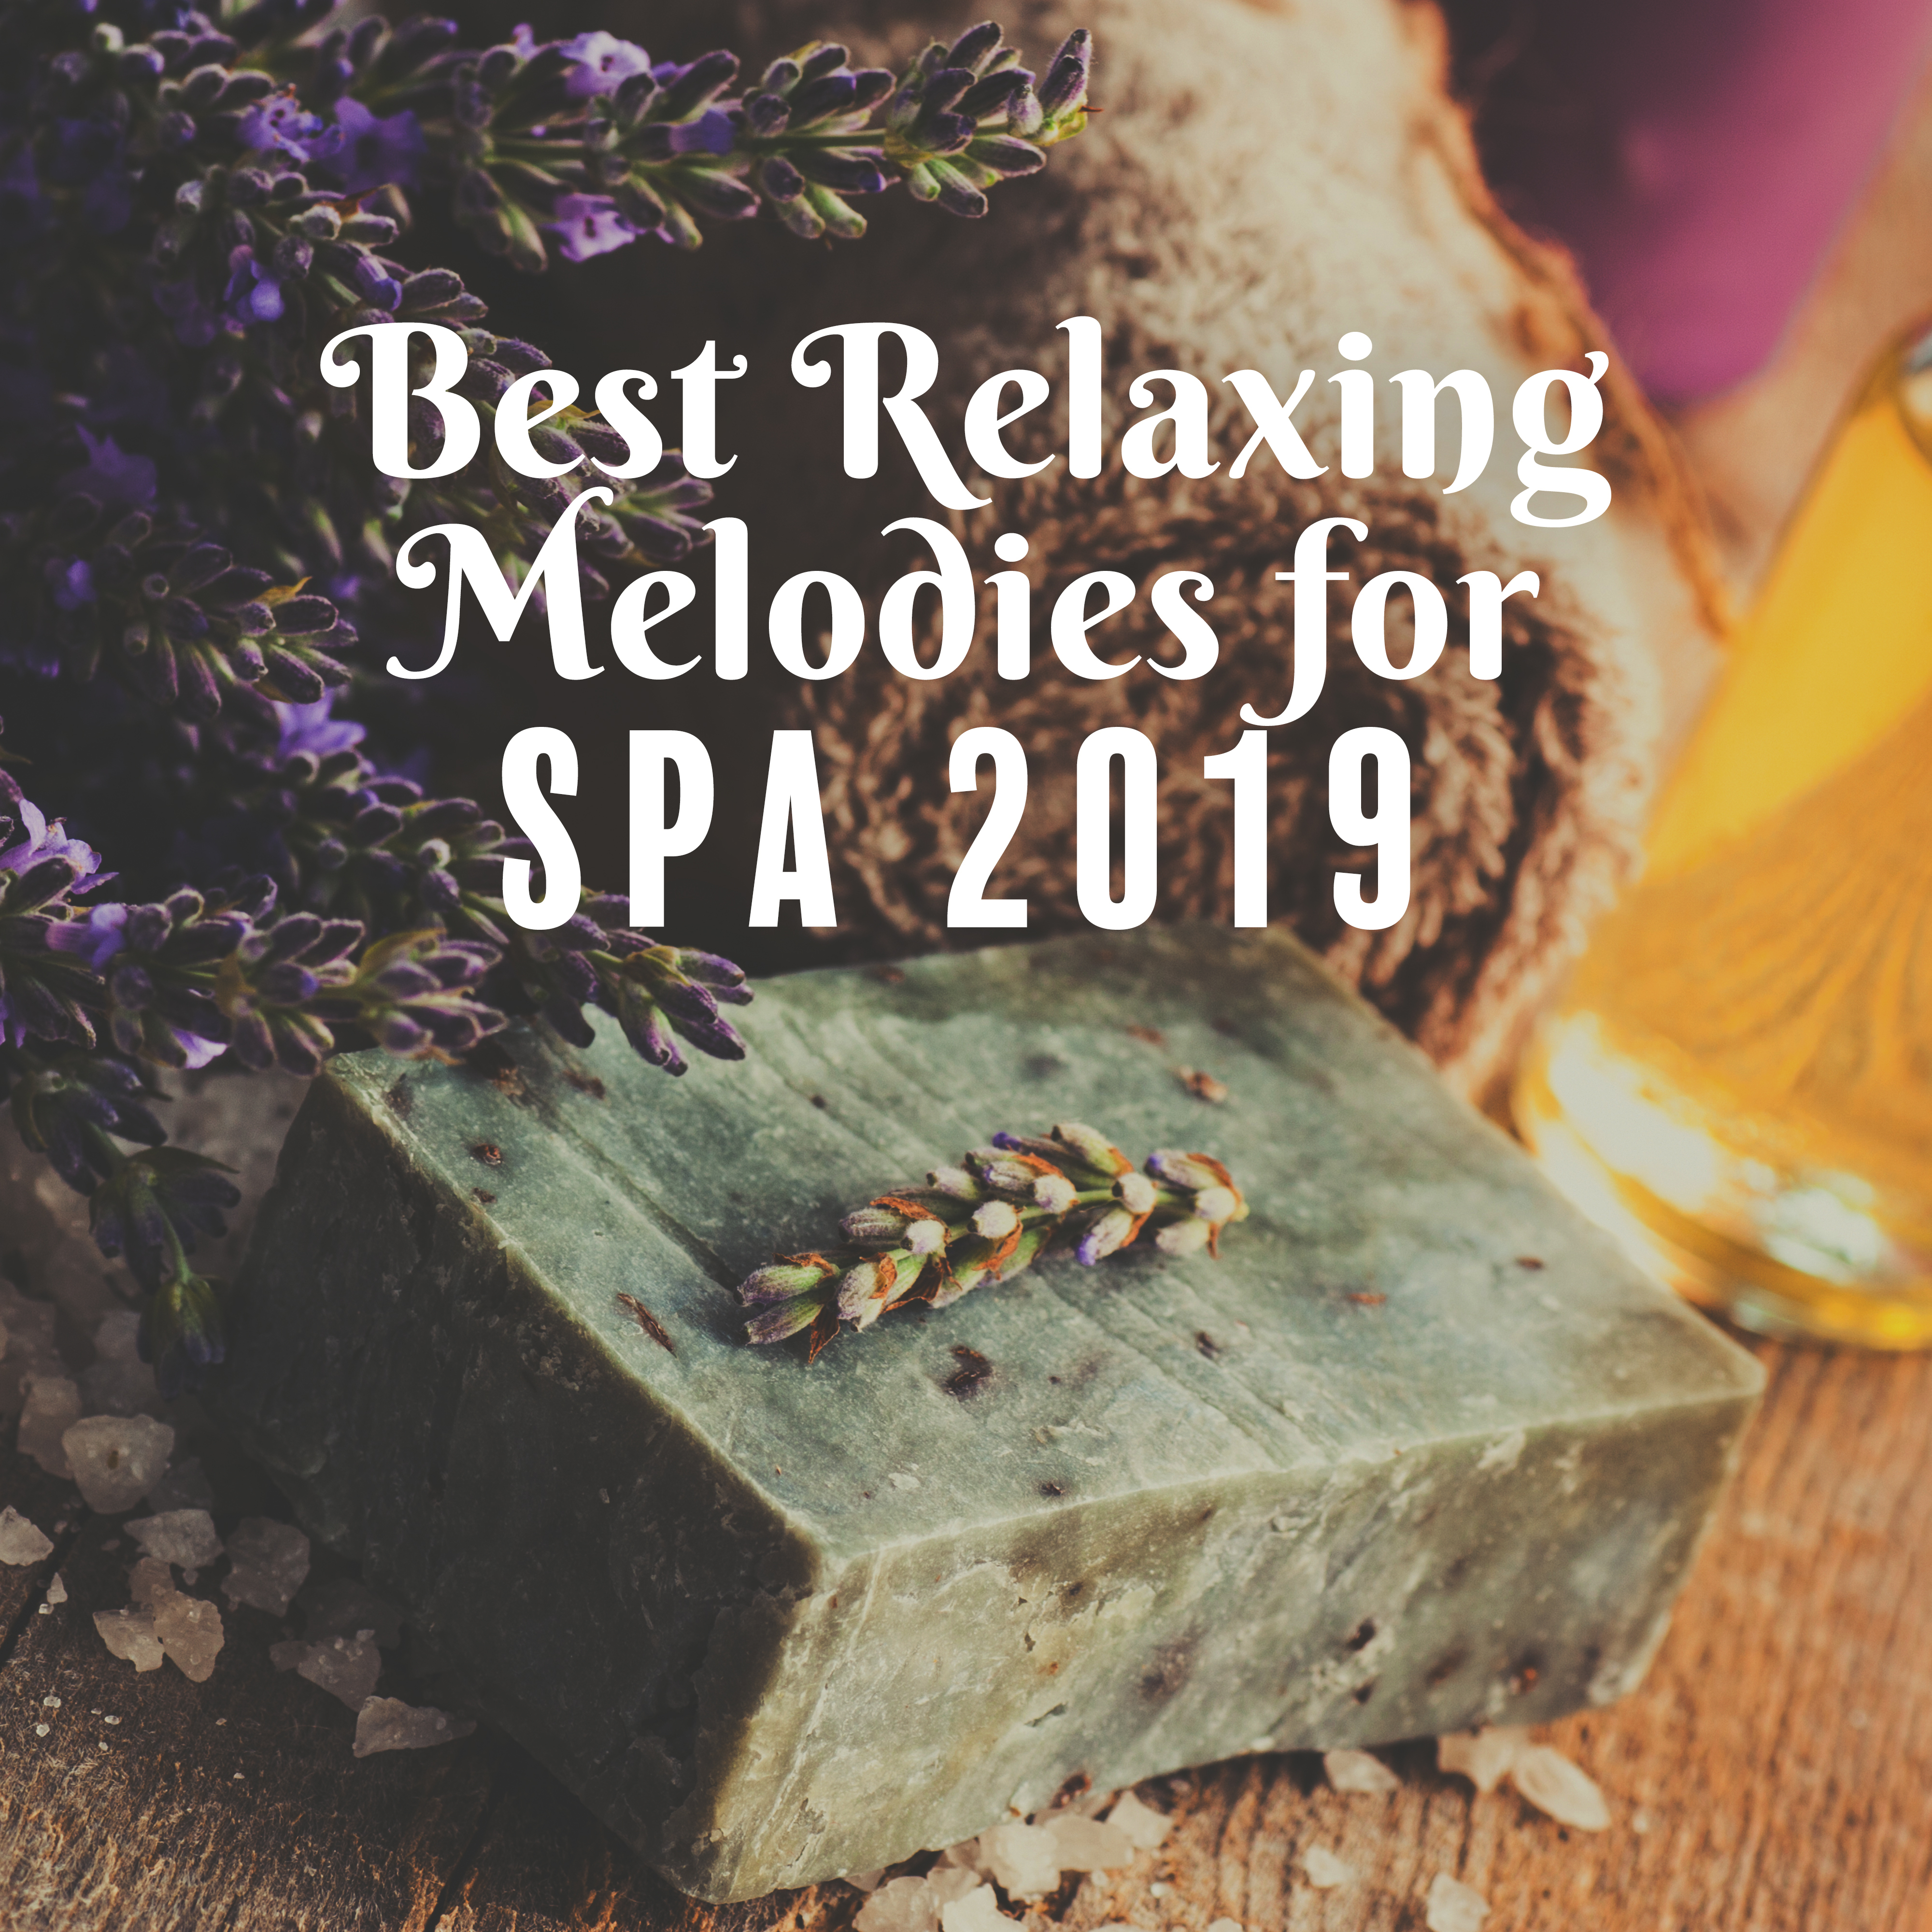 Best Relaxing Melodies for SPA 2019